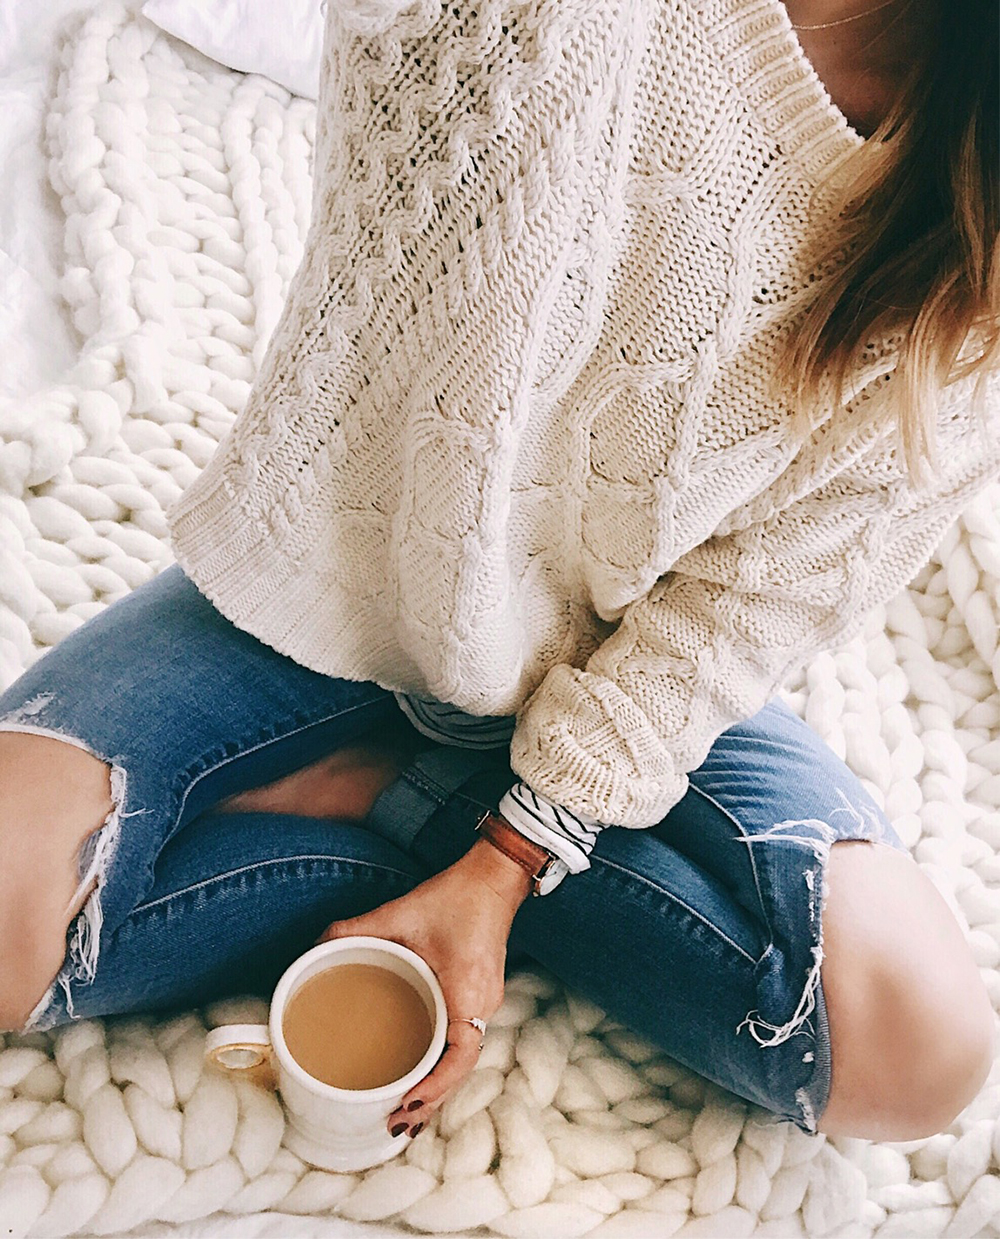 livvyland-blog-olivia-watson-fall-outfit-cableknit-sweater-layers-striped-tee-chunky-knit-throw-blanket